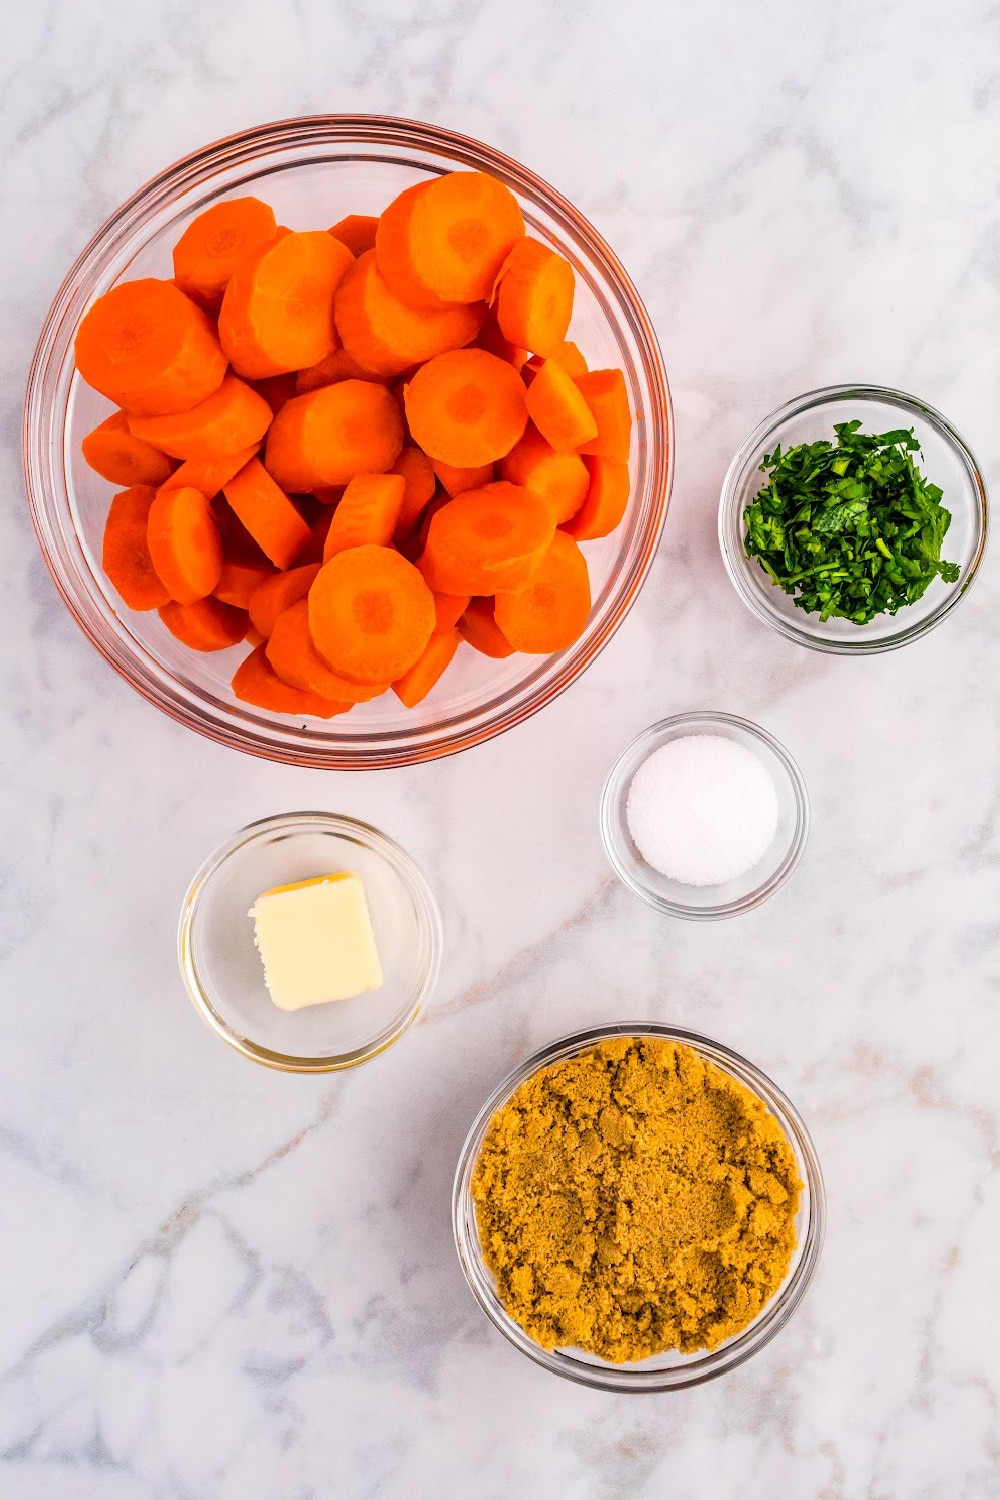 Measured ingredients for making Brown Sugar Carrots presented in clear glass bowls on a marble countertop.